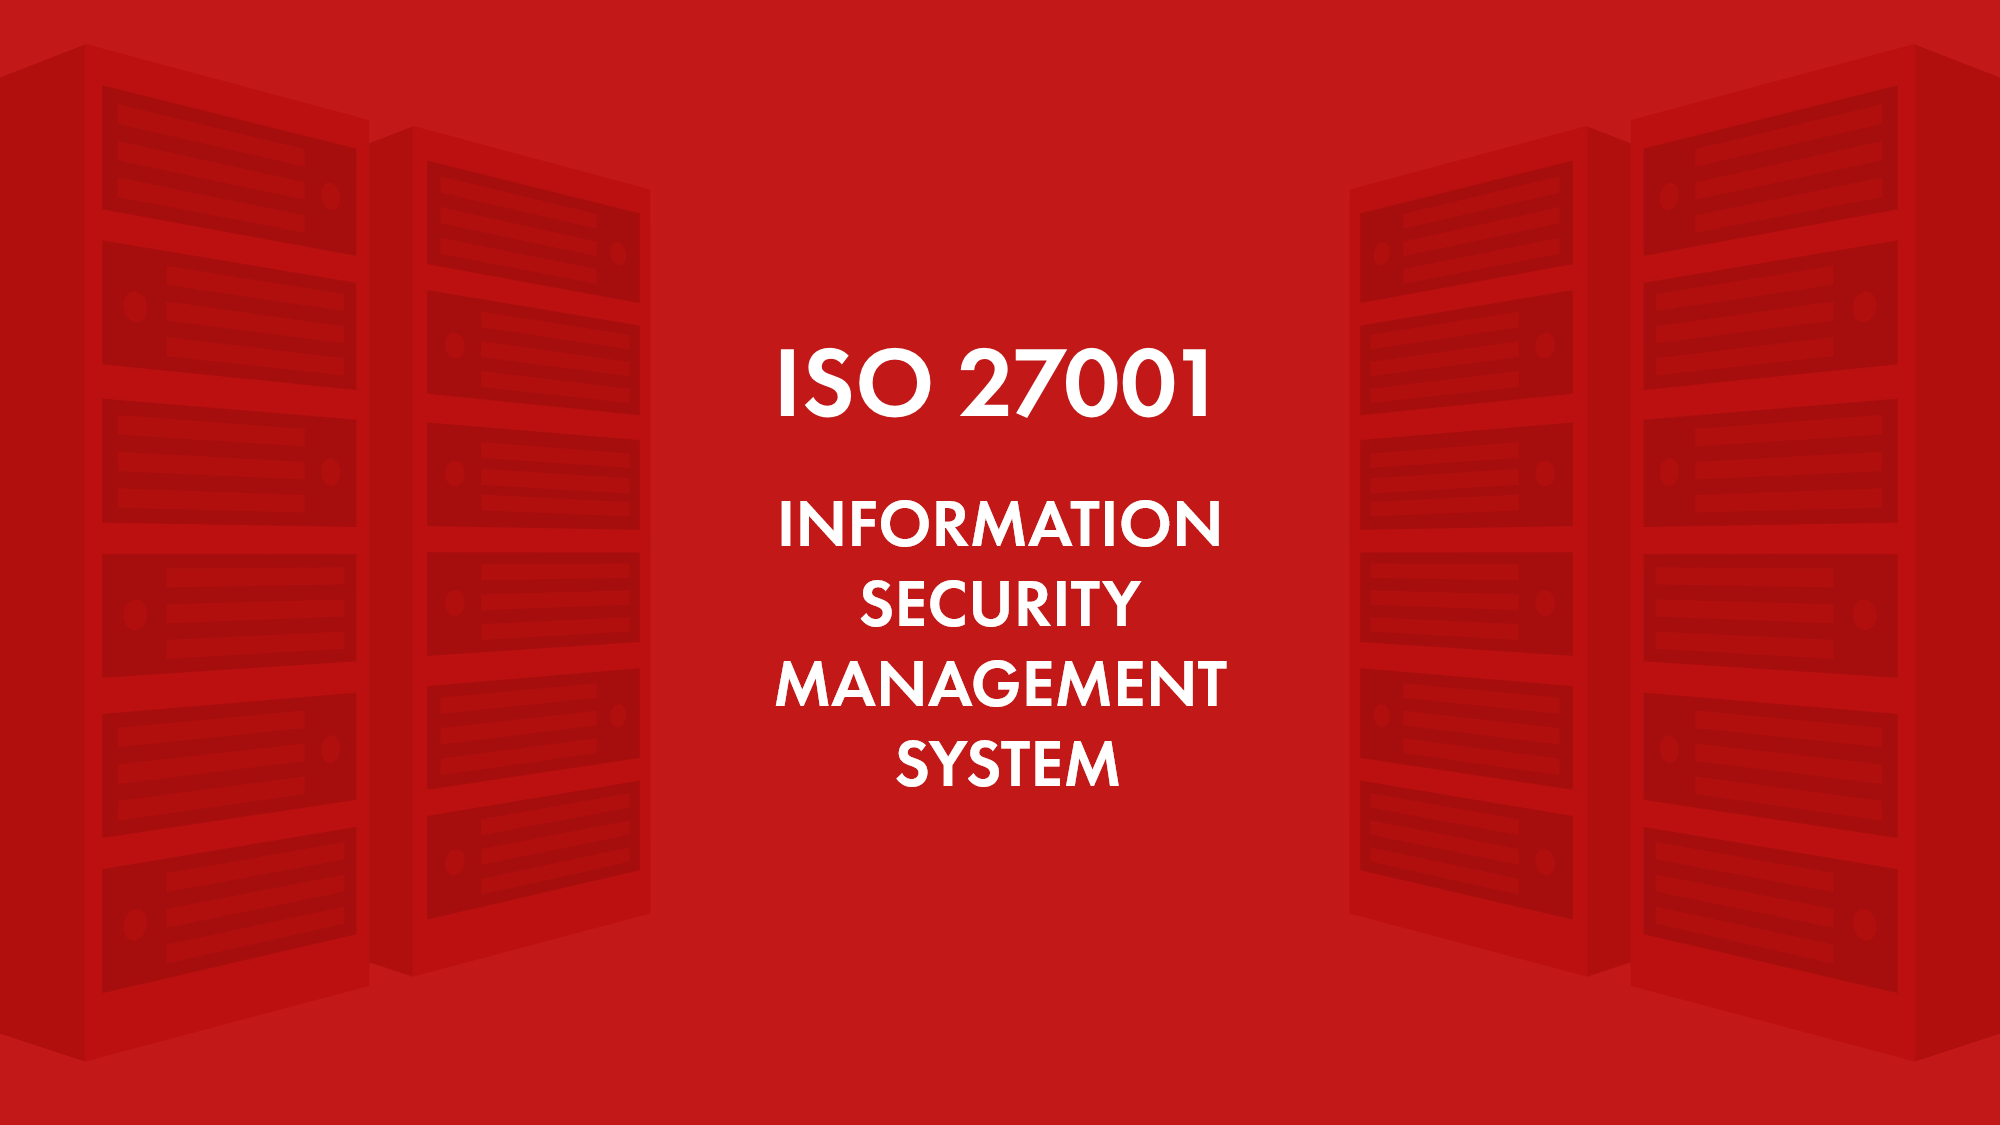 How to protect your data using ISO 27001?